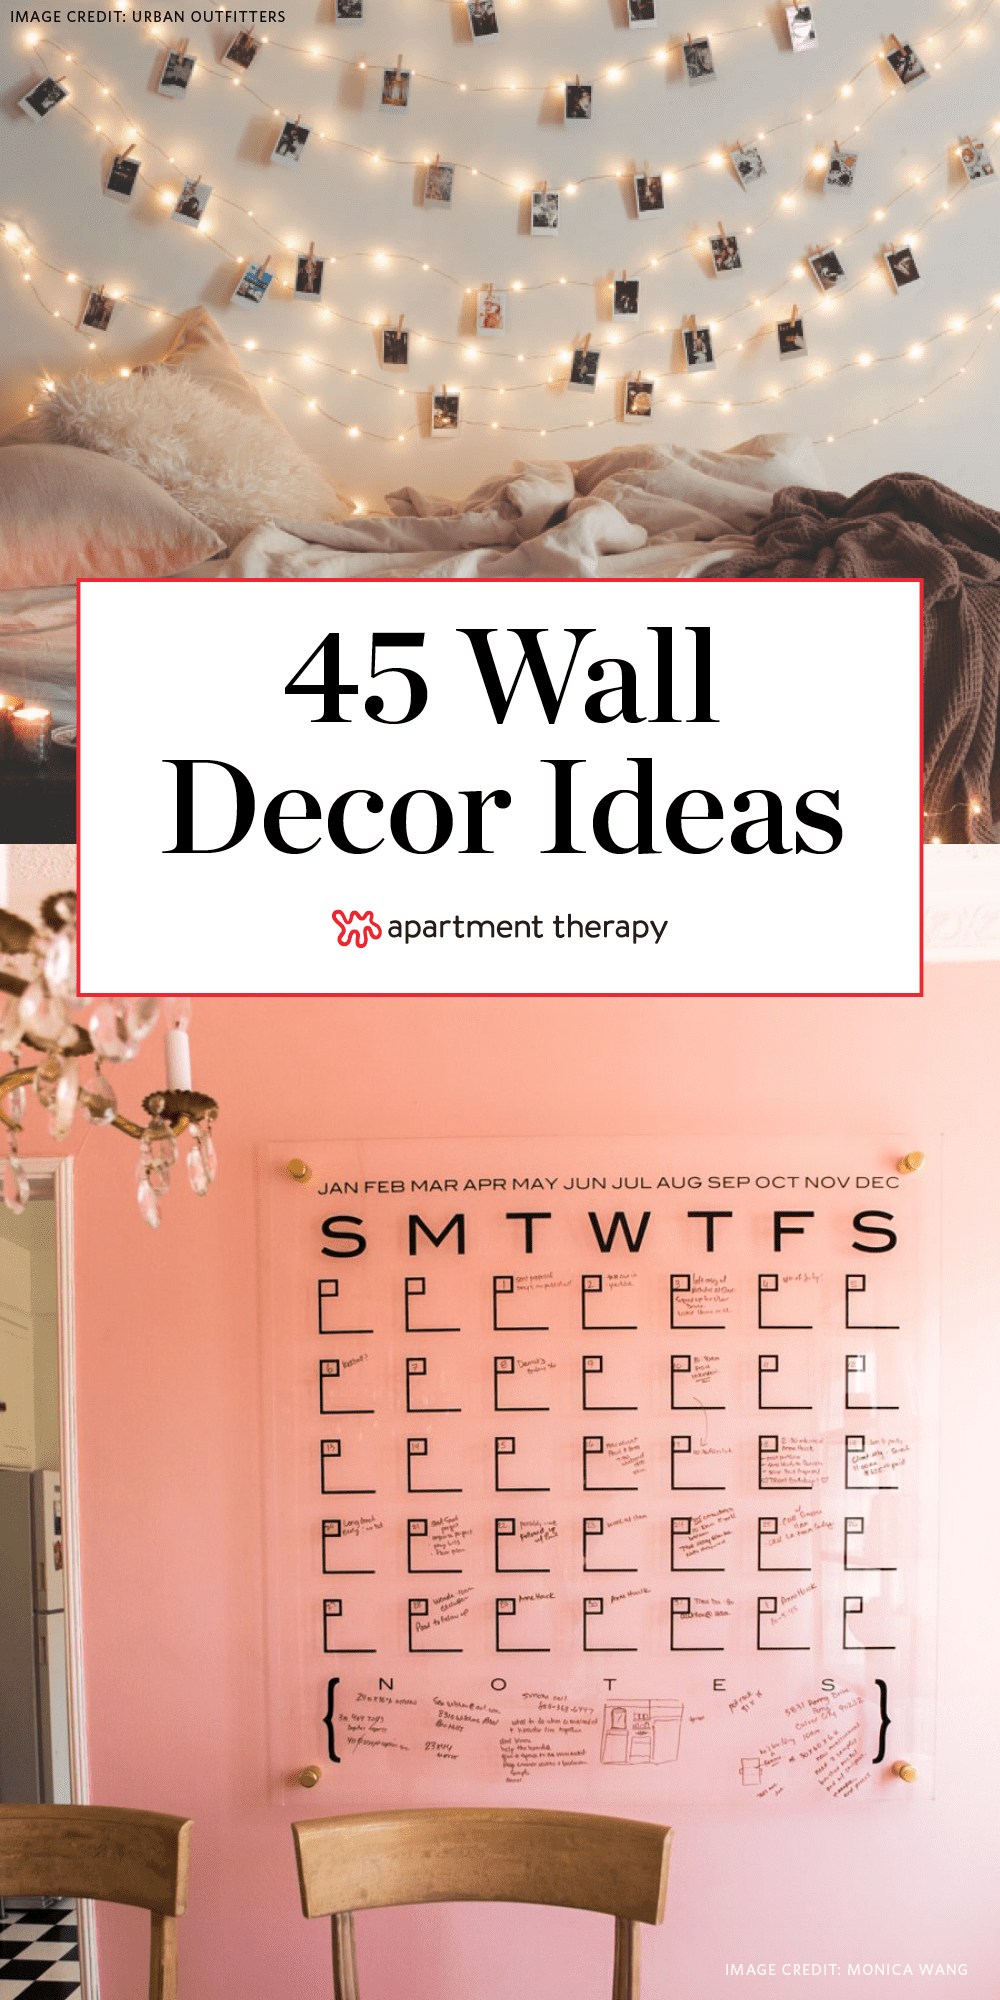 Wall Decor Ideas 45 Things To Try At Home Apartment Therapy Images, Photos, Reviews